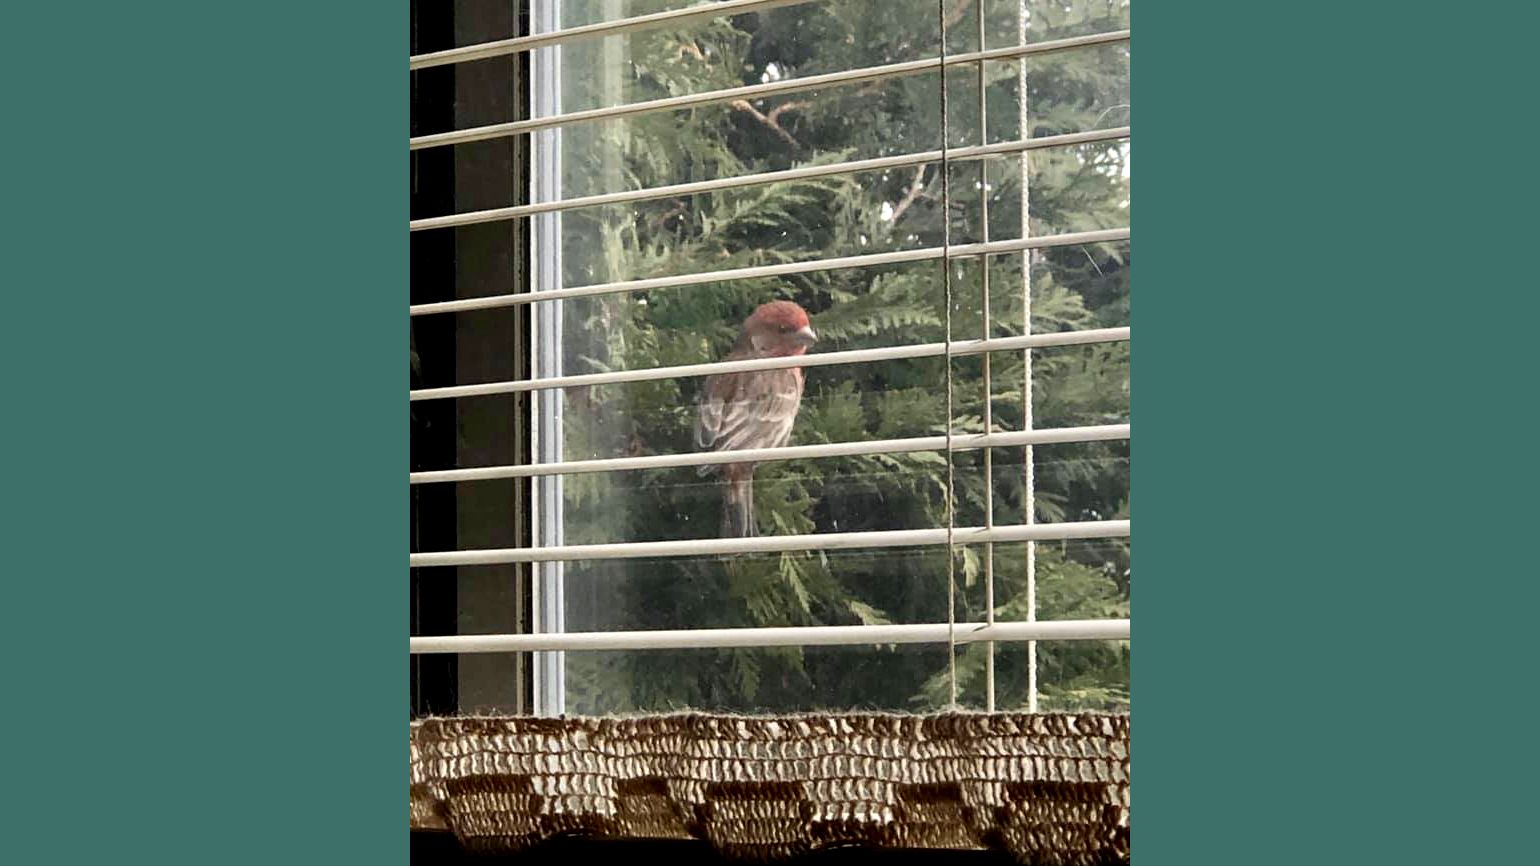 A house finch’s daily visits.